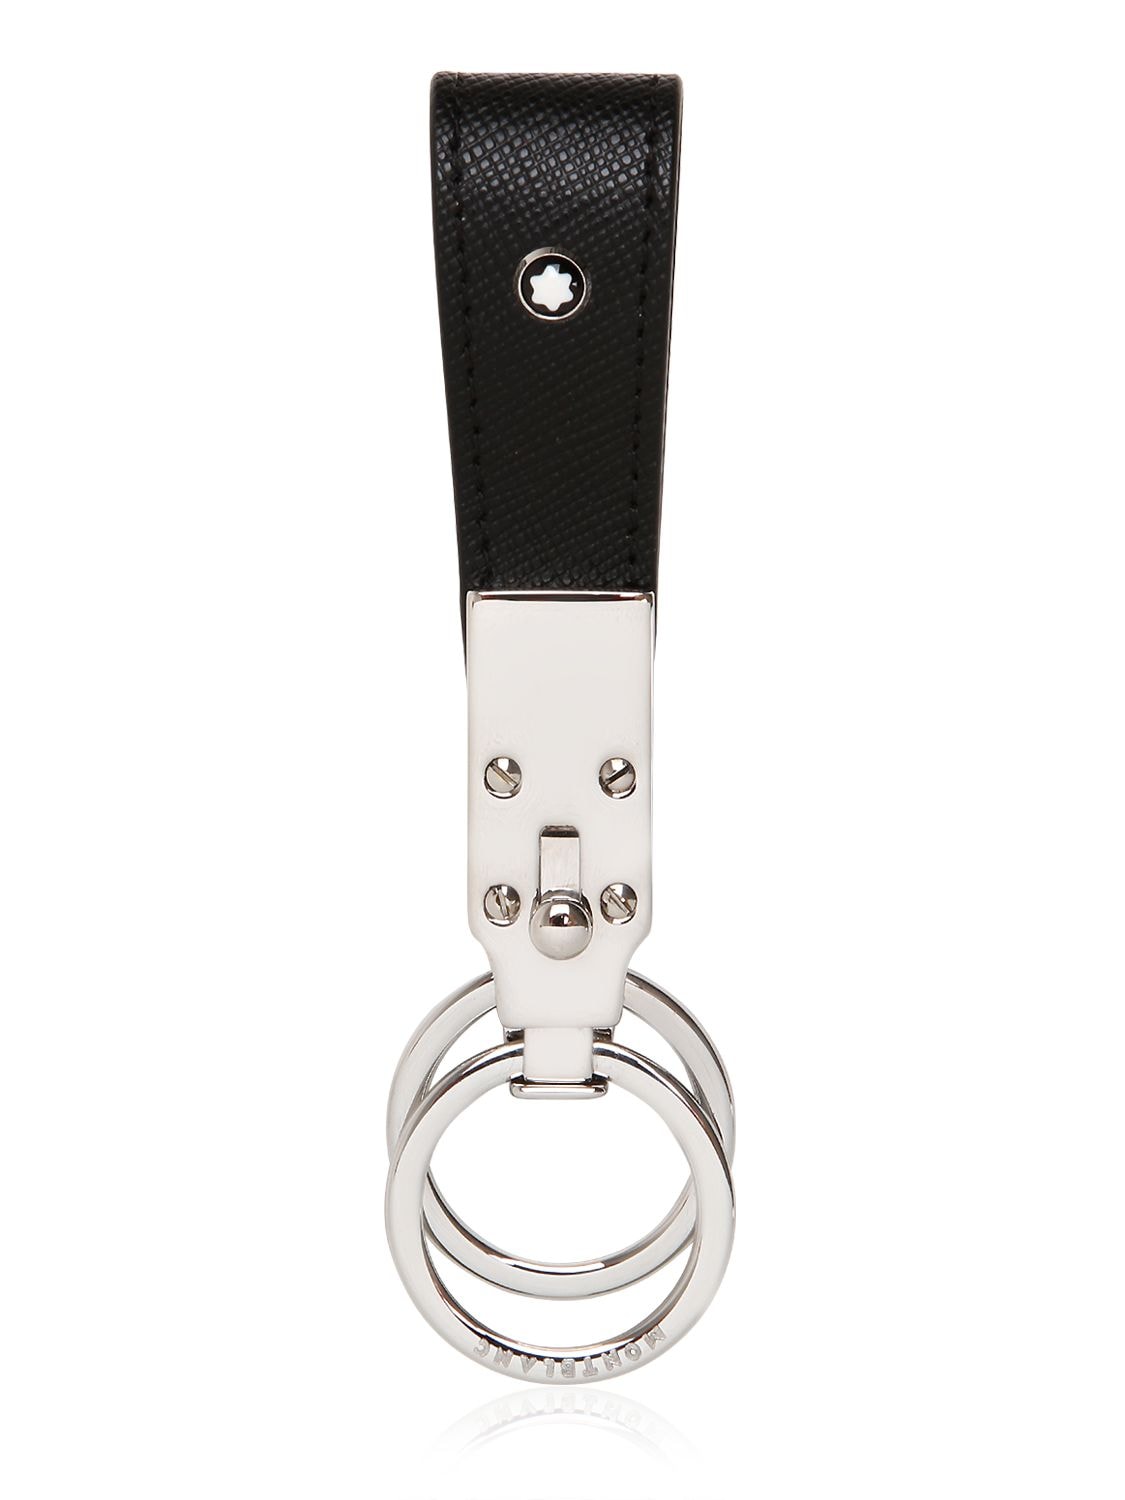 Montblanc Mb Extreme 2.0 Leather Key Holder In Black